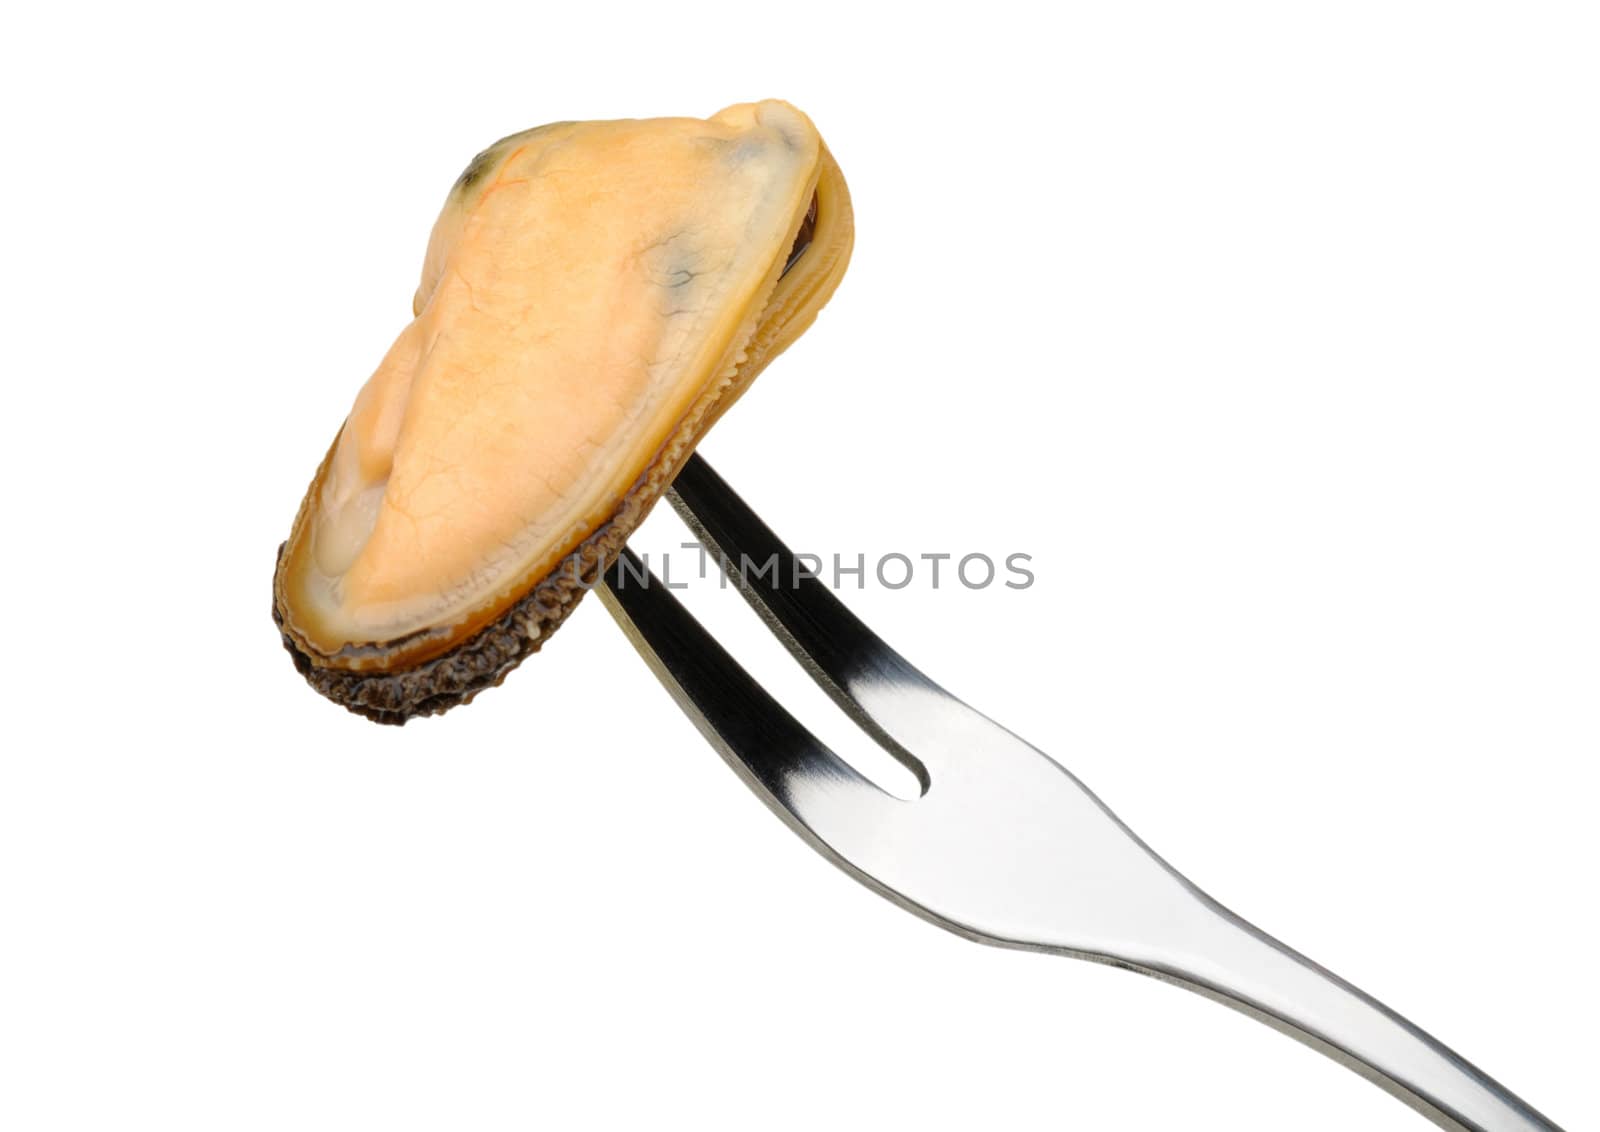 mussel on a fork isolated on white background